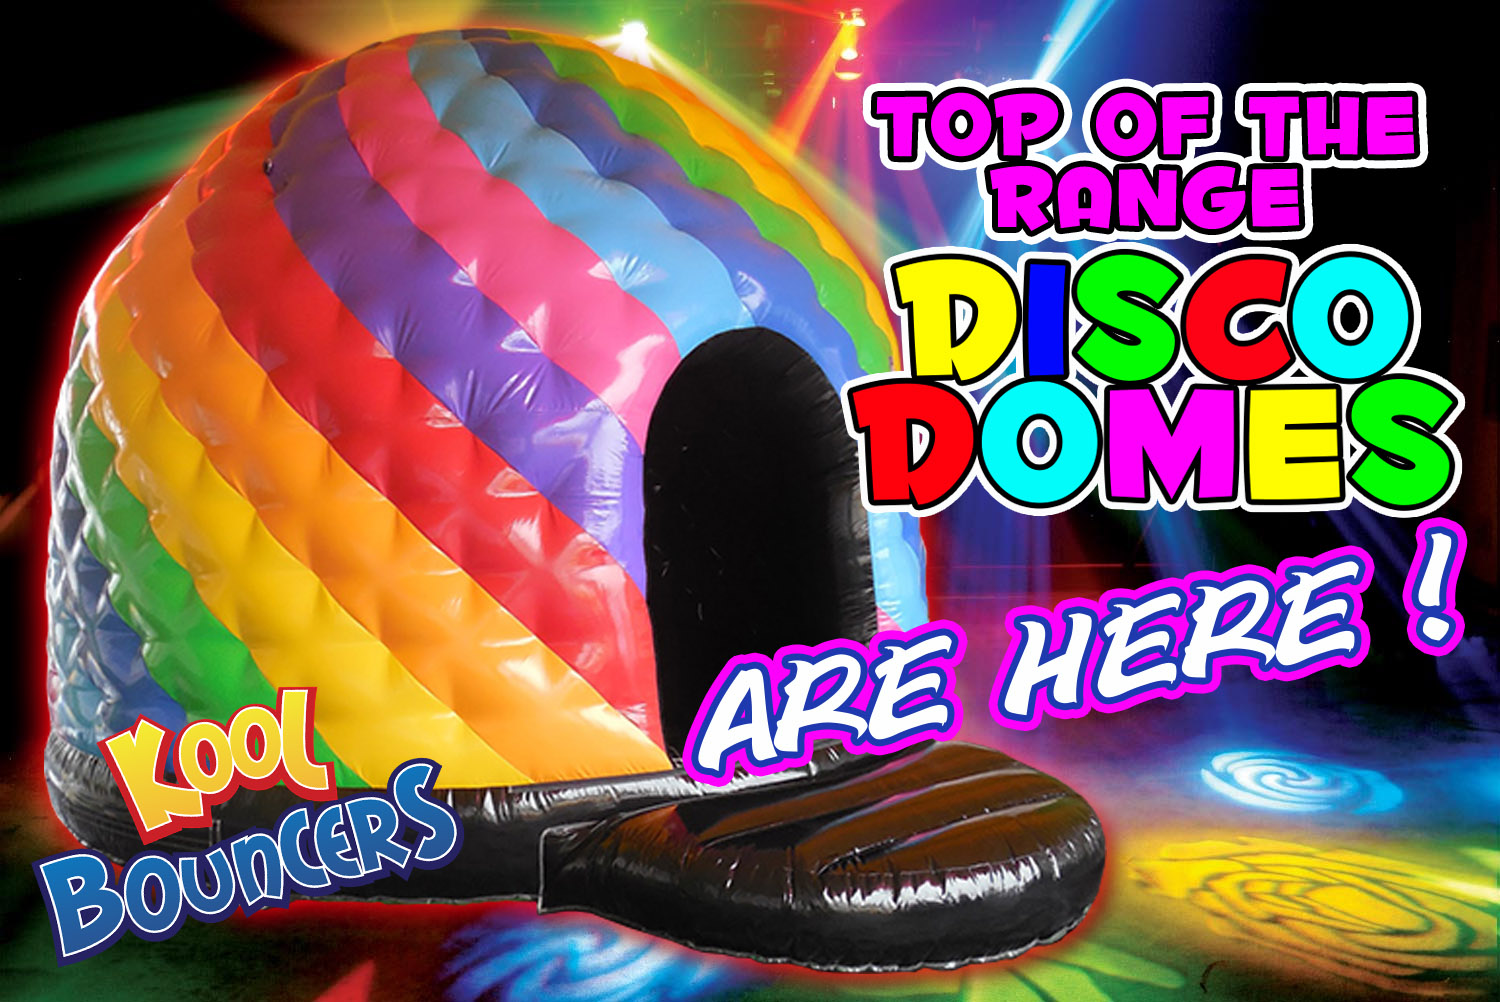 Disco Dome hire in cambridgeshire, St Neots, Cambourne, Huntingdon, Bedford and Sandy